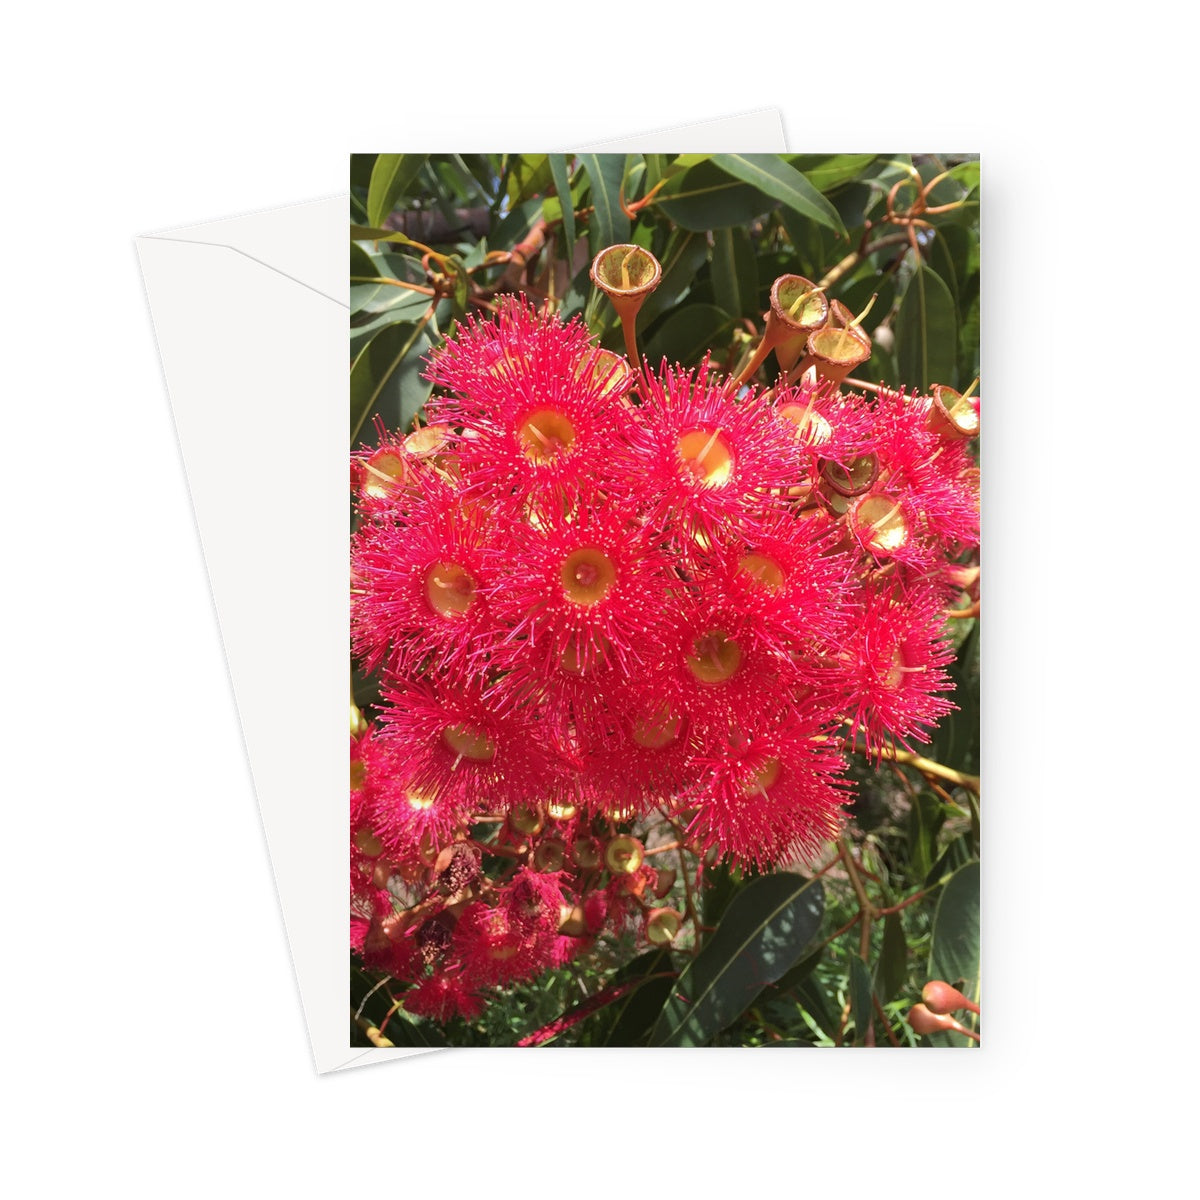 Closeup of a pink bottlebrush plant on this greeting card